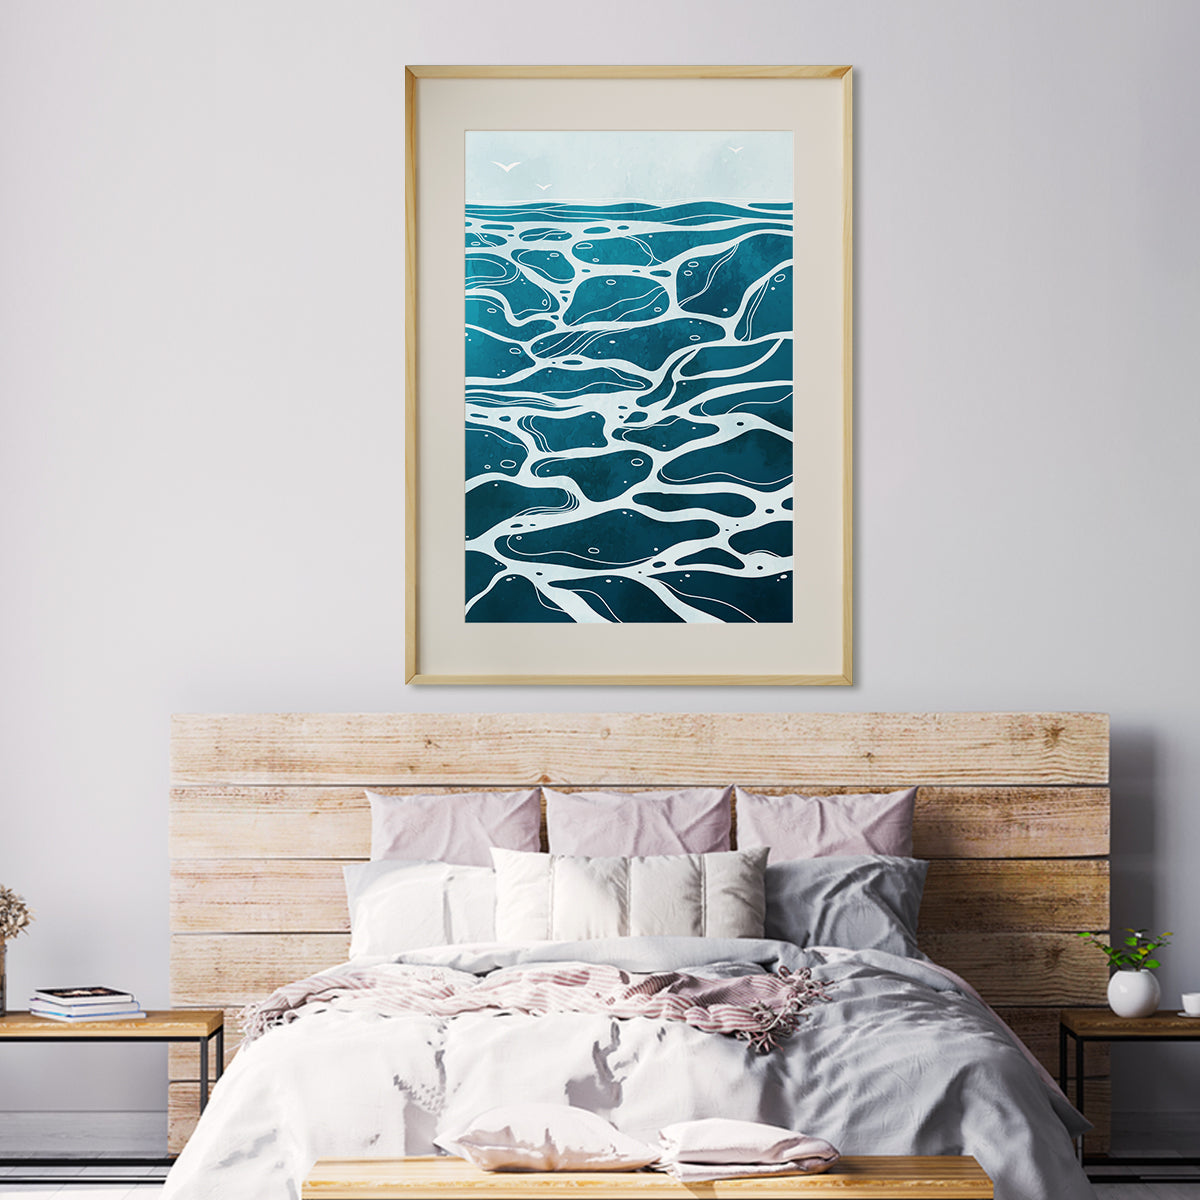 Abstract Blue Sea Waves Living Room Art Posters Japanese Style-Vertical Posters NOT FRAMED-CetArt-8″x10″ inches-CetArt